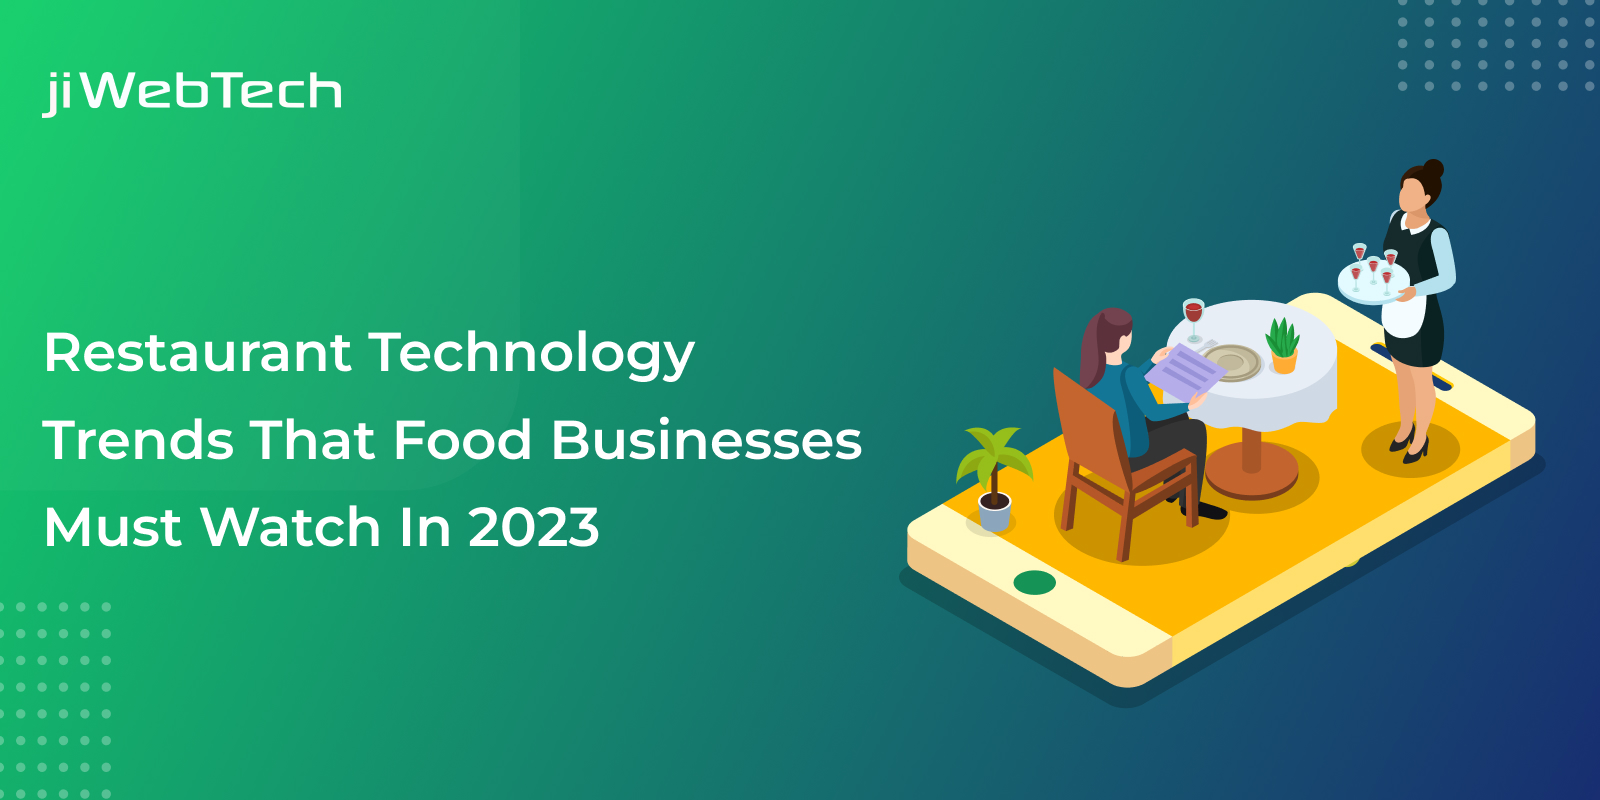 Restaurant Technology Trends That Food Businesses Must Watch In 2023